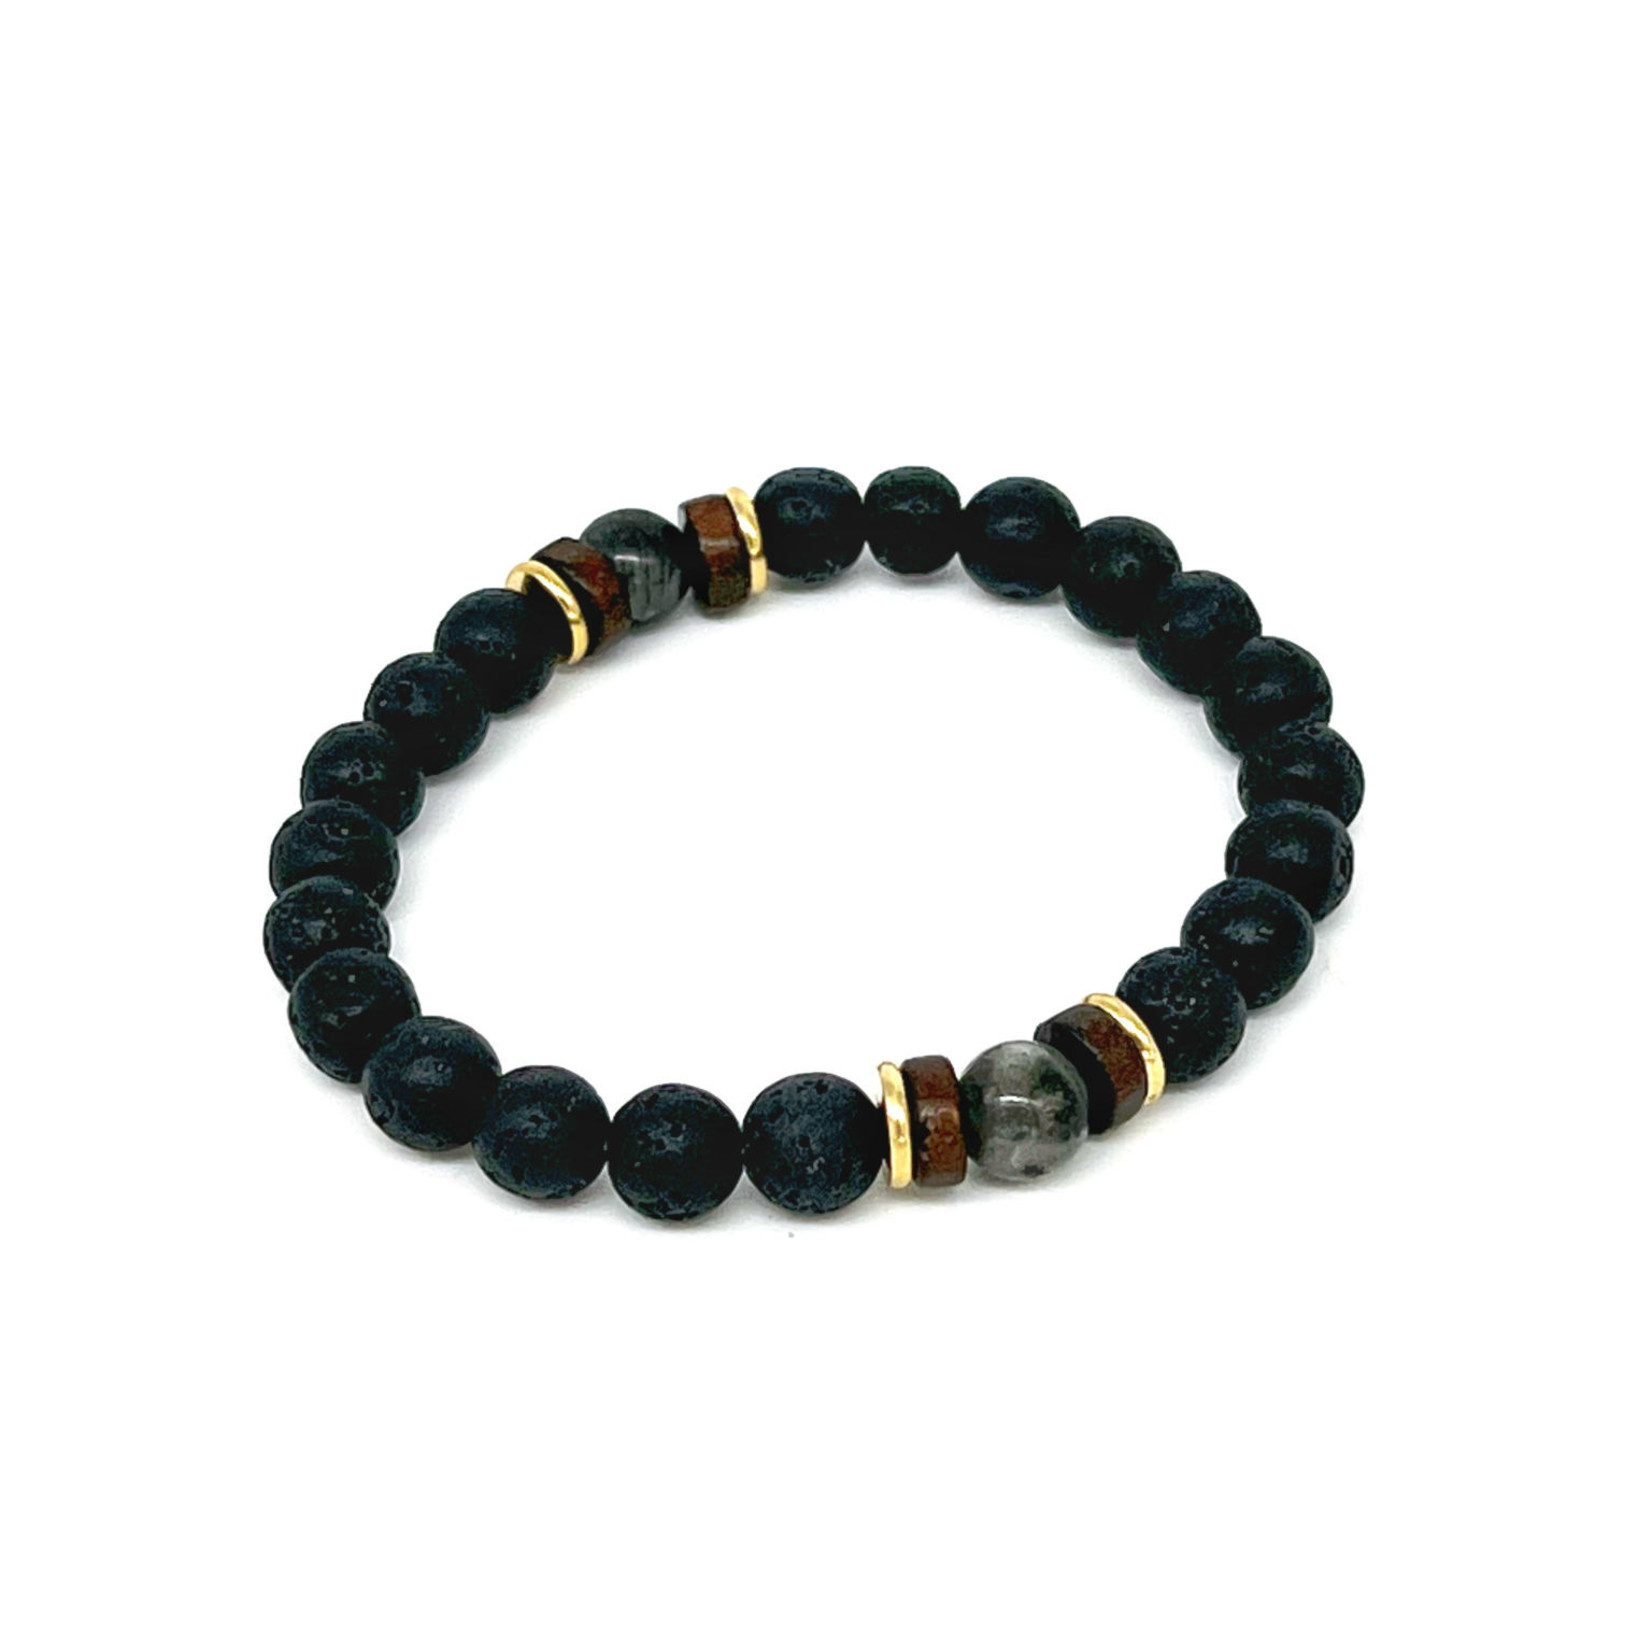 8mm Lava, Gemstone and Wood Bead Stretch Bracelet Shining Stone with Gold